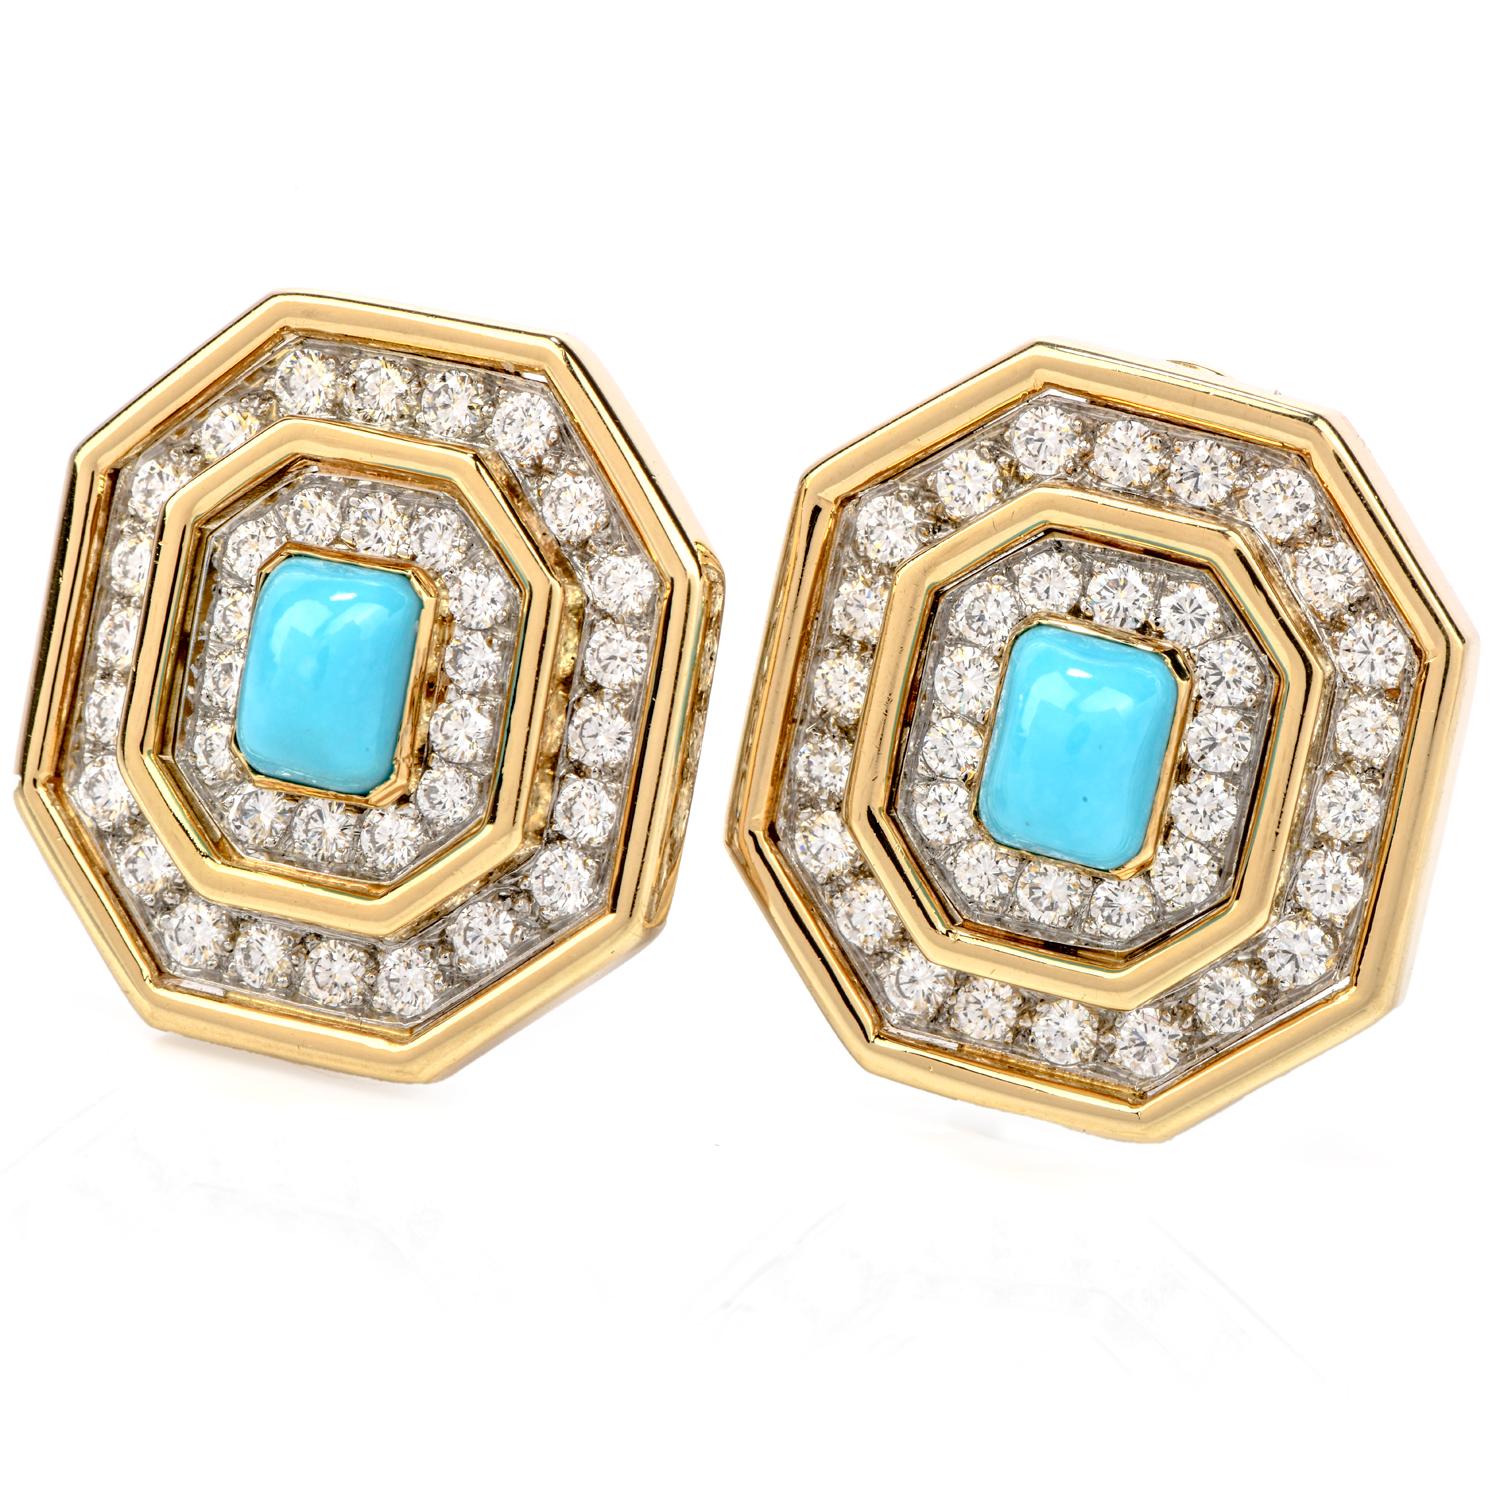 Choose these striking and dreamy vintage Diamond turquoise 18K Gold Octagon Halo Clip-On Earrings!  This 1970s chic earrings are crafted in 18 karat yellow and white gold.

Centered with a genuine turquoise of cushion cabochon shape, bezel set. 